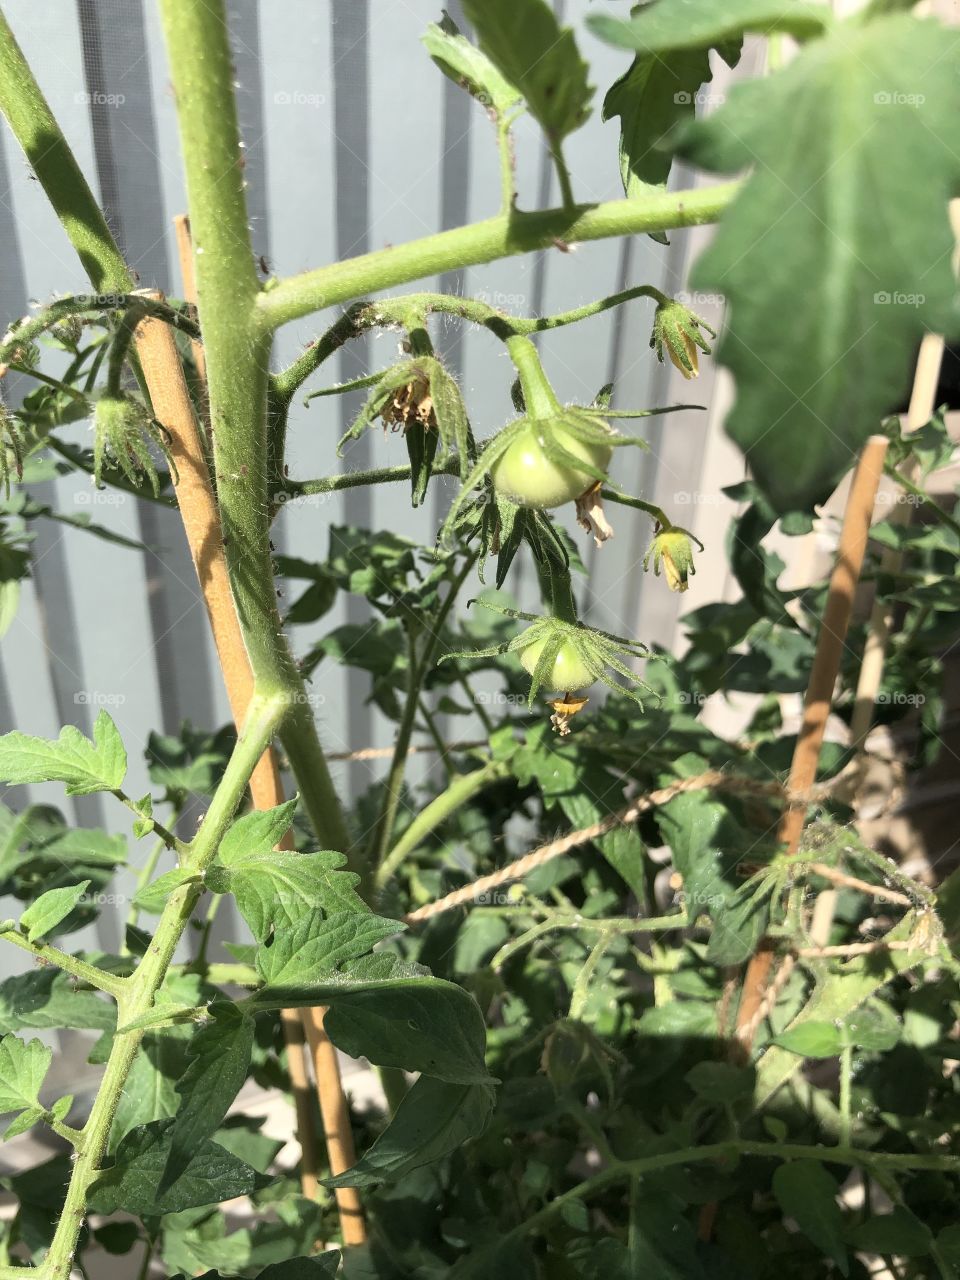 Heirloom tomato plant starting to grow tomatoes 